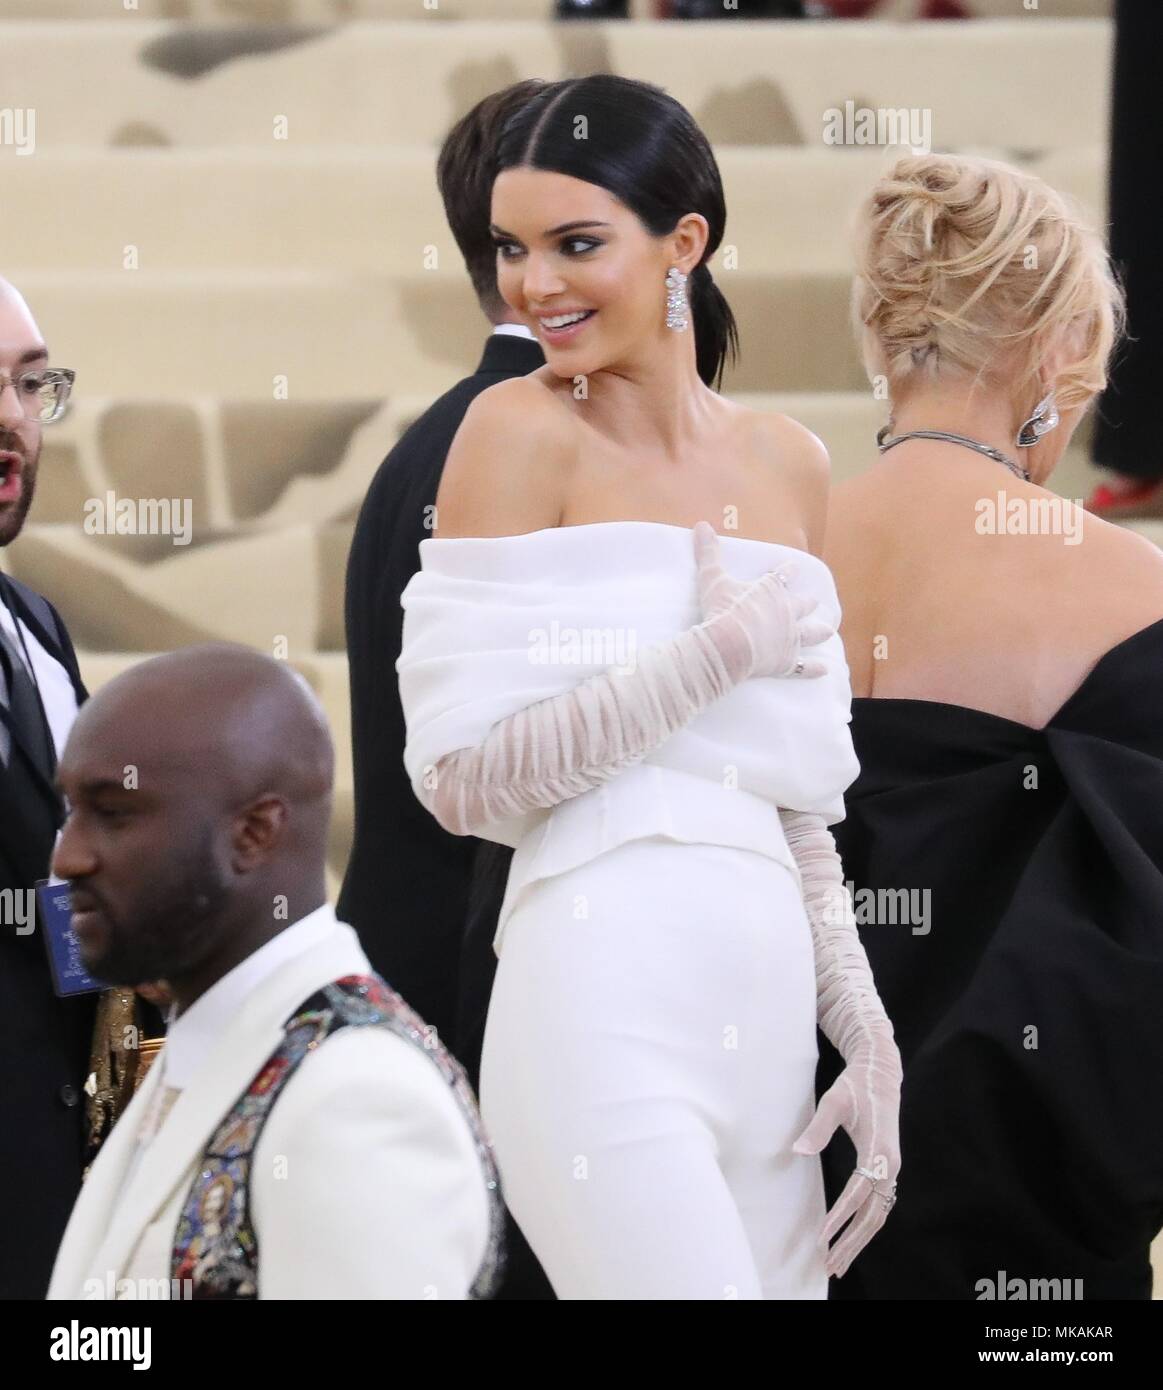 Kendall Jenner and Virgil Abloh attending the Metropolitan Museum of Art  Costume Institute Benefit Gala 2018 in New York, USA. PRESS ASSOCIATION  Photo. Picture date: Monday May 7, 2018. See PA story